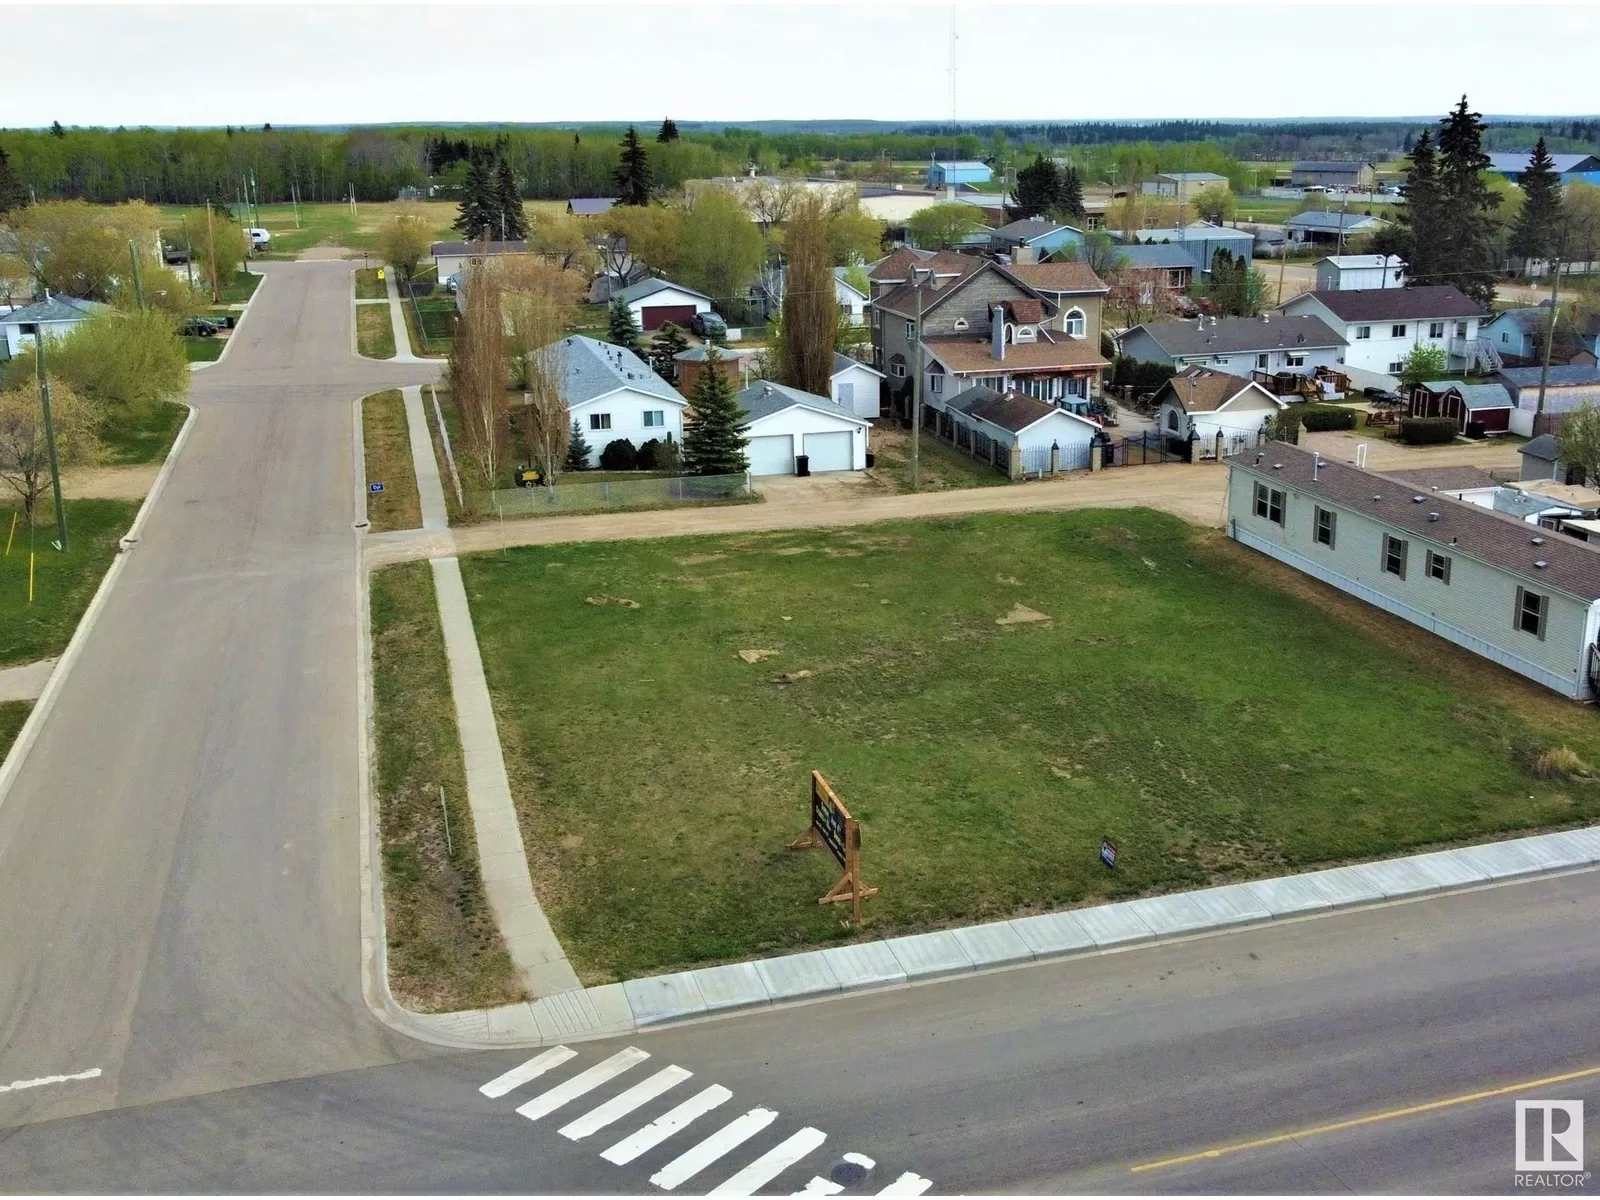 No Building for rent: 4909 50 St, Ardmore, Alberta T0A 0B0